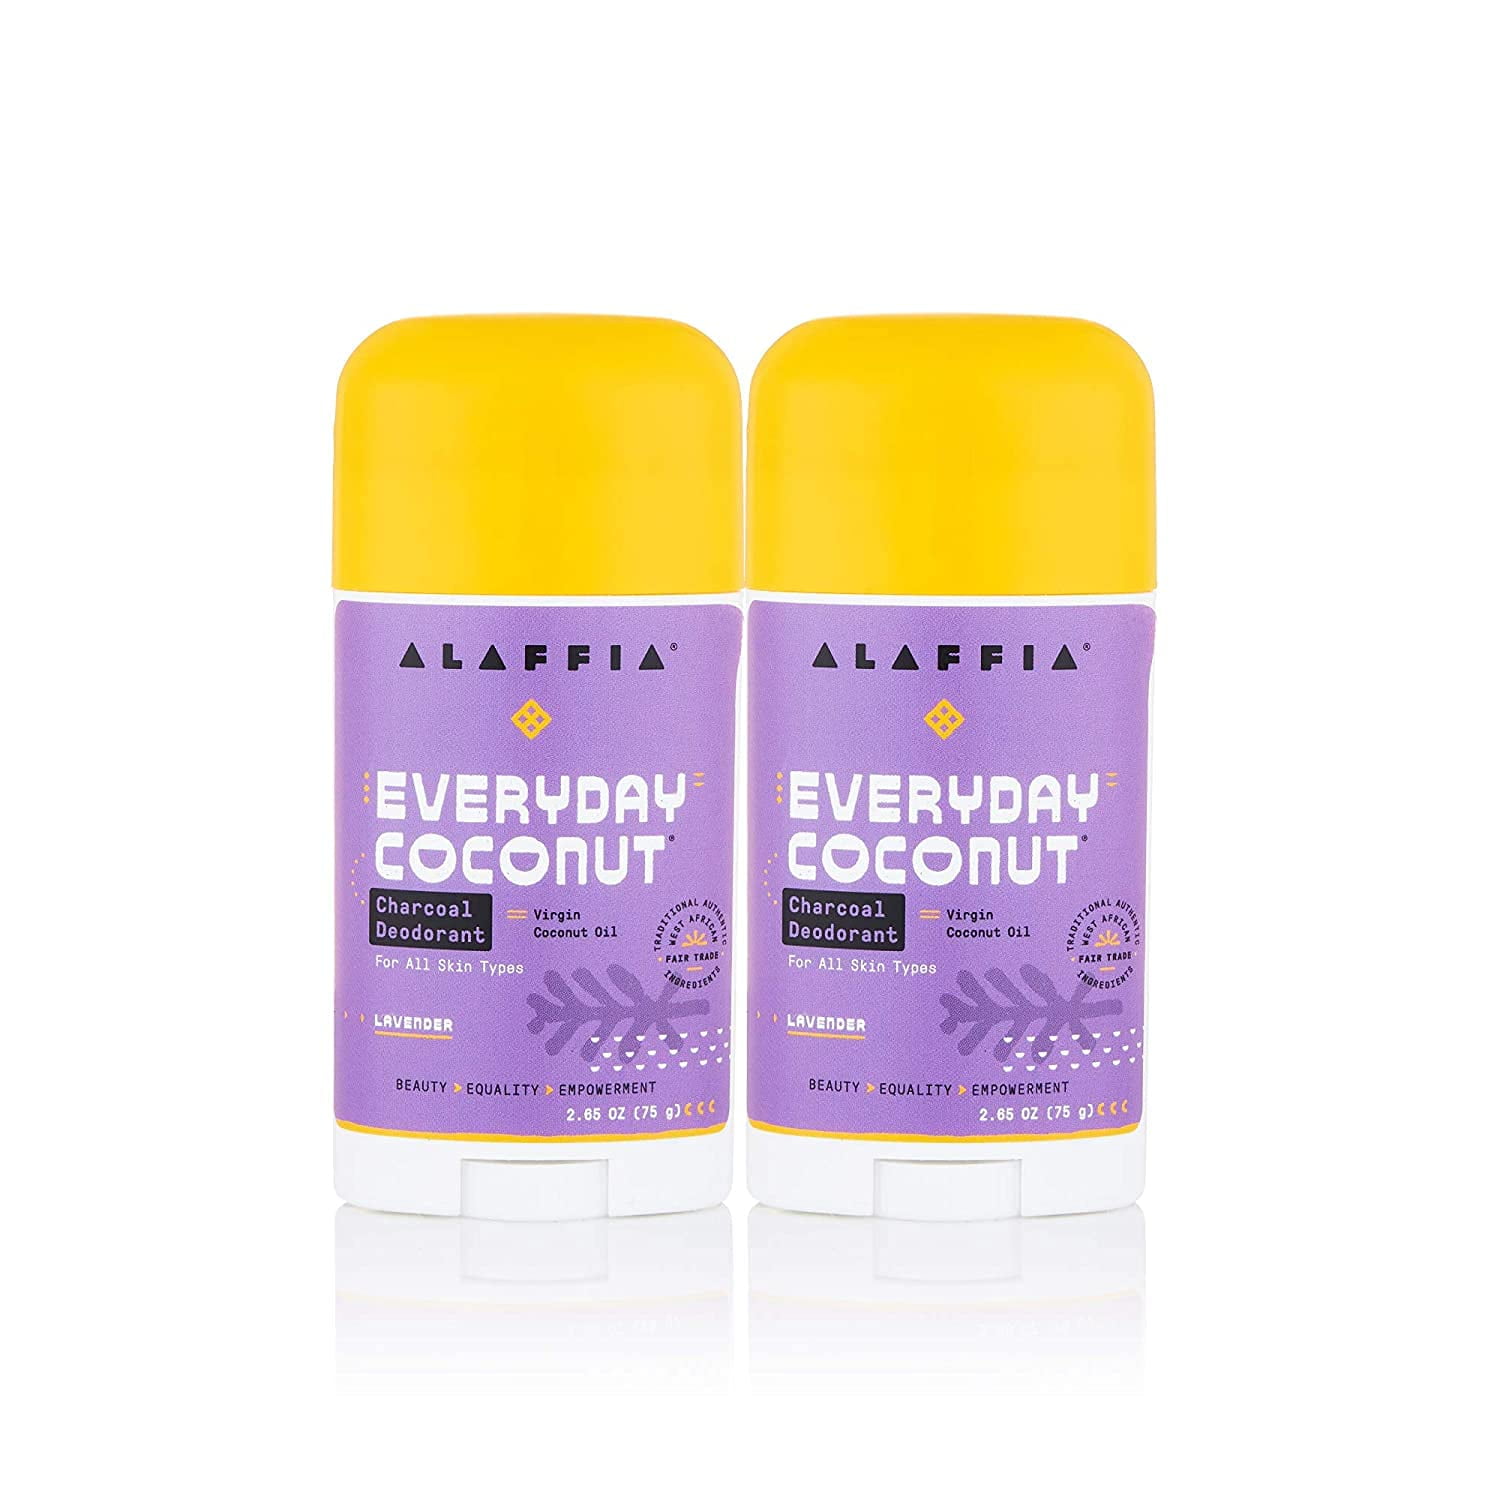 Alaffia Everyday Coconut Deodorant - Activated Odor Protection and Soothing Support from Shea Butter and Aloe Vera, Without Aluminum, Sulfates, or Parabens, Coconut Lavender - Walmart.com